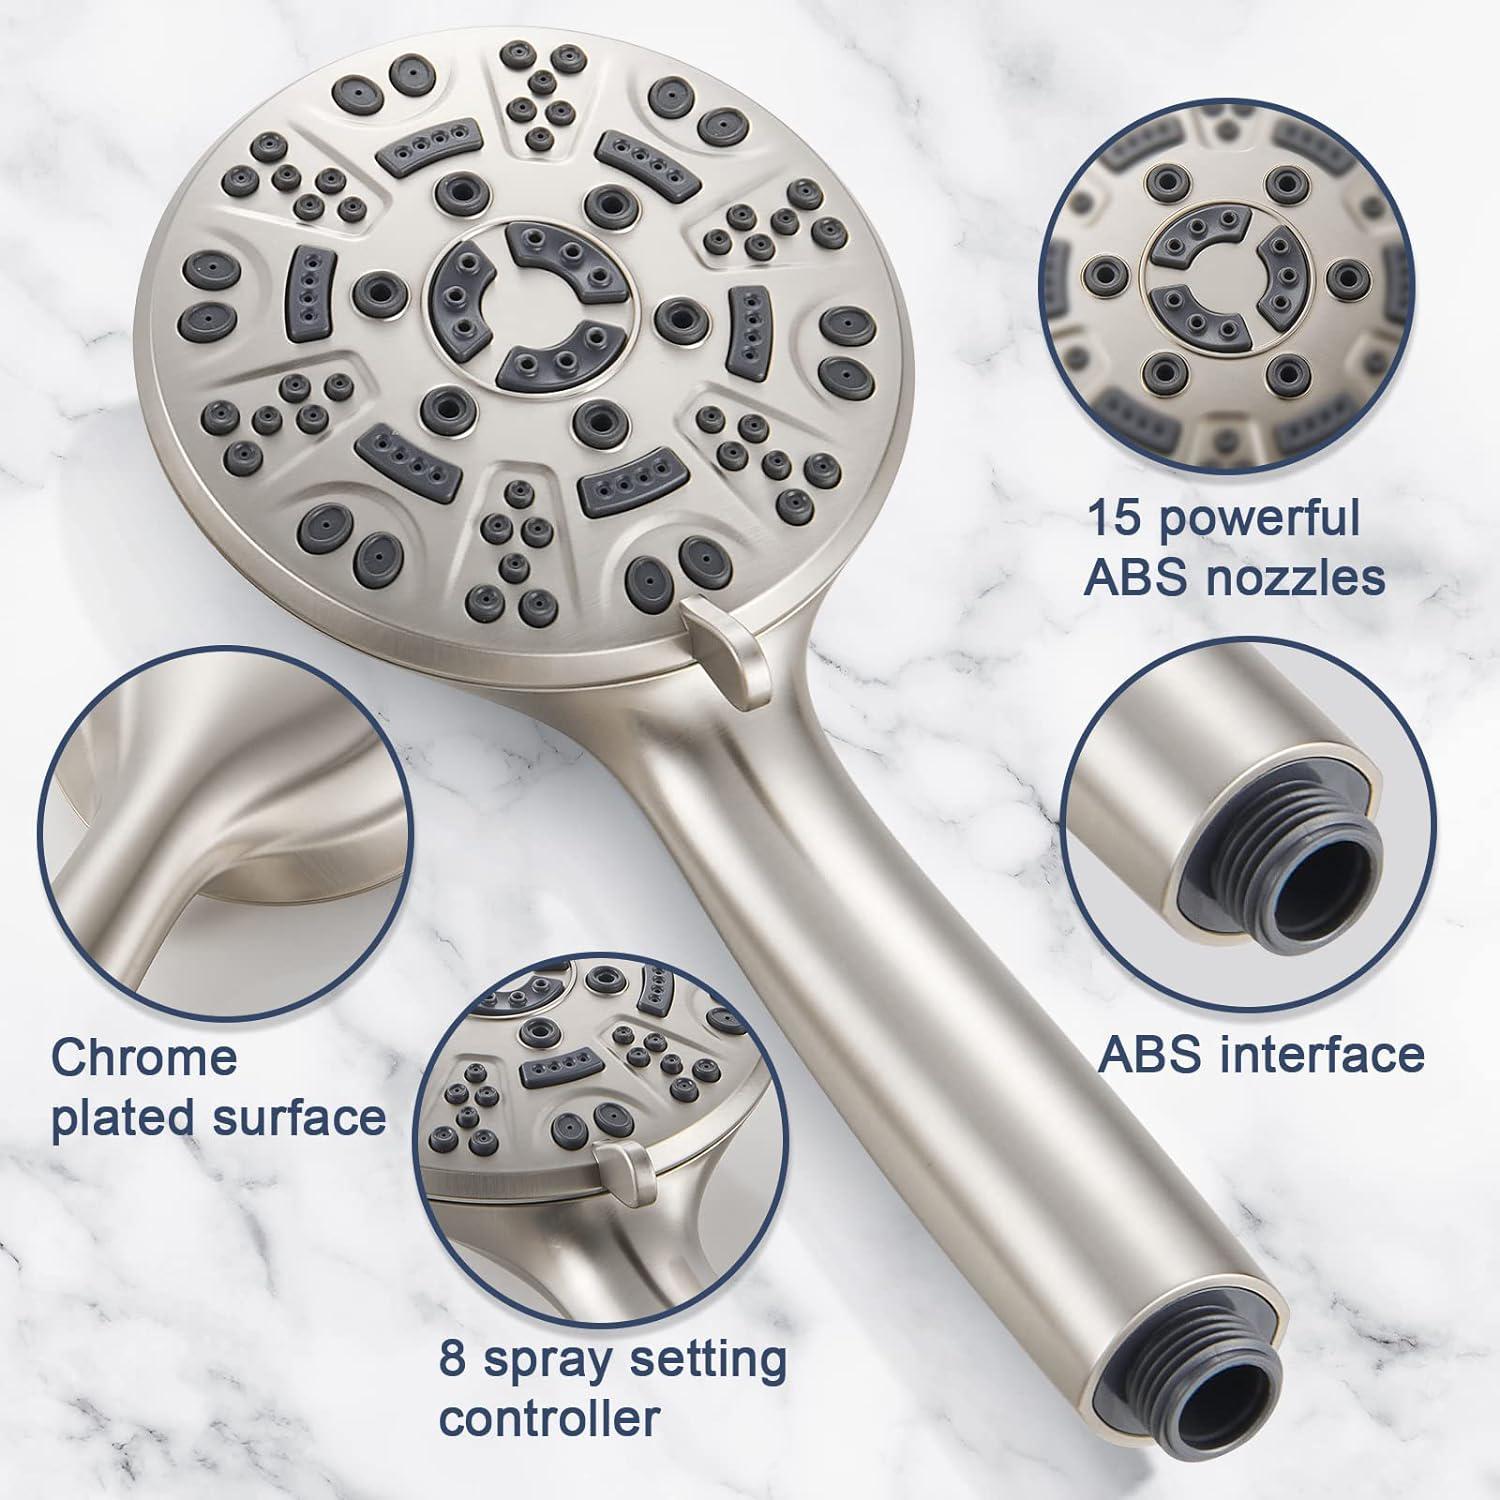 HOPOPRO NBC News Recommended 2 PCS 5 Modes High Pressure Shower